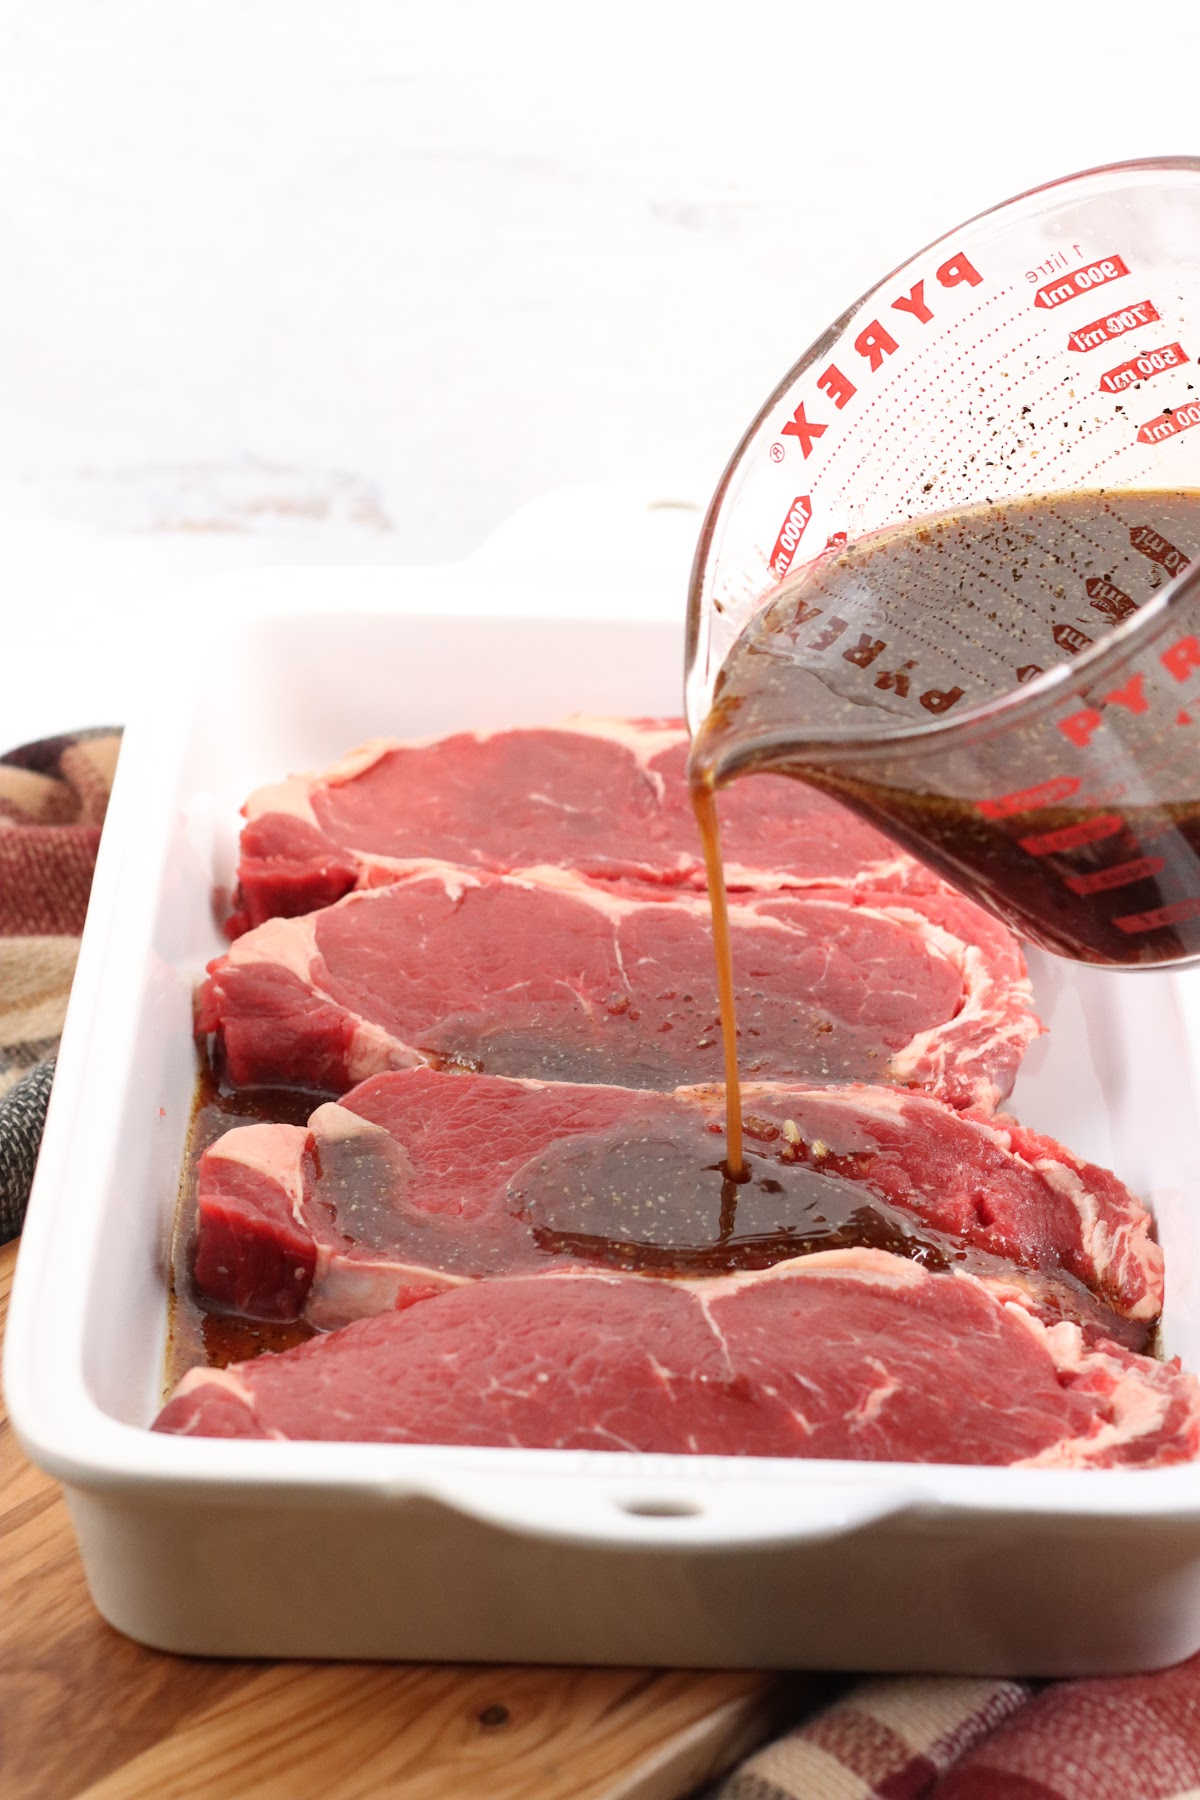 Ribeye steaks in white ceramic baking dish, marinade being poured over top.